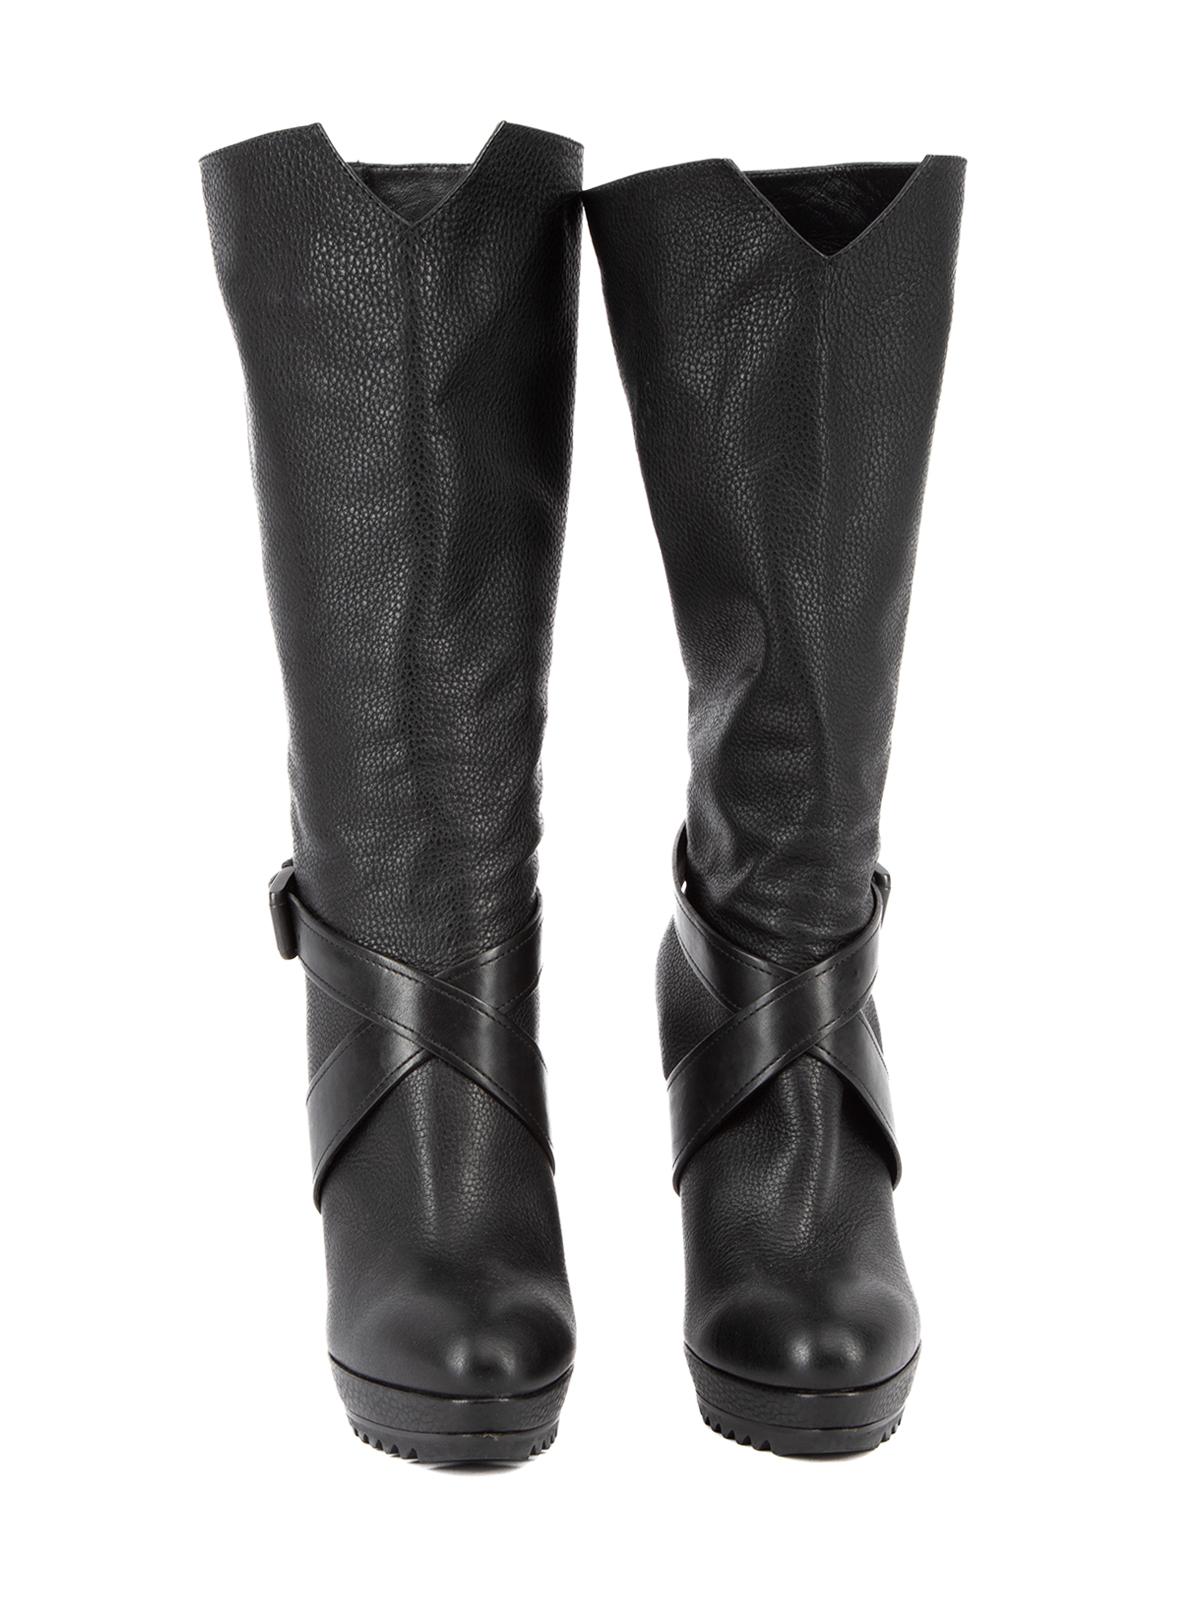 Pre-Loved Bottega Veneta Women's Knee High Boots with Buckle Detail In Excellent Condition For Sale In London, GB